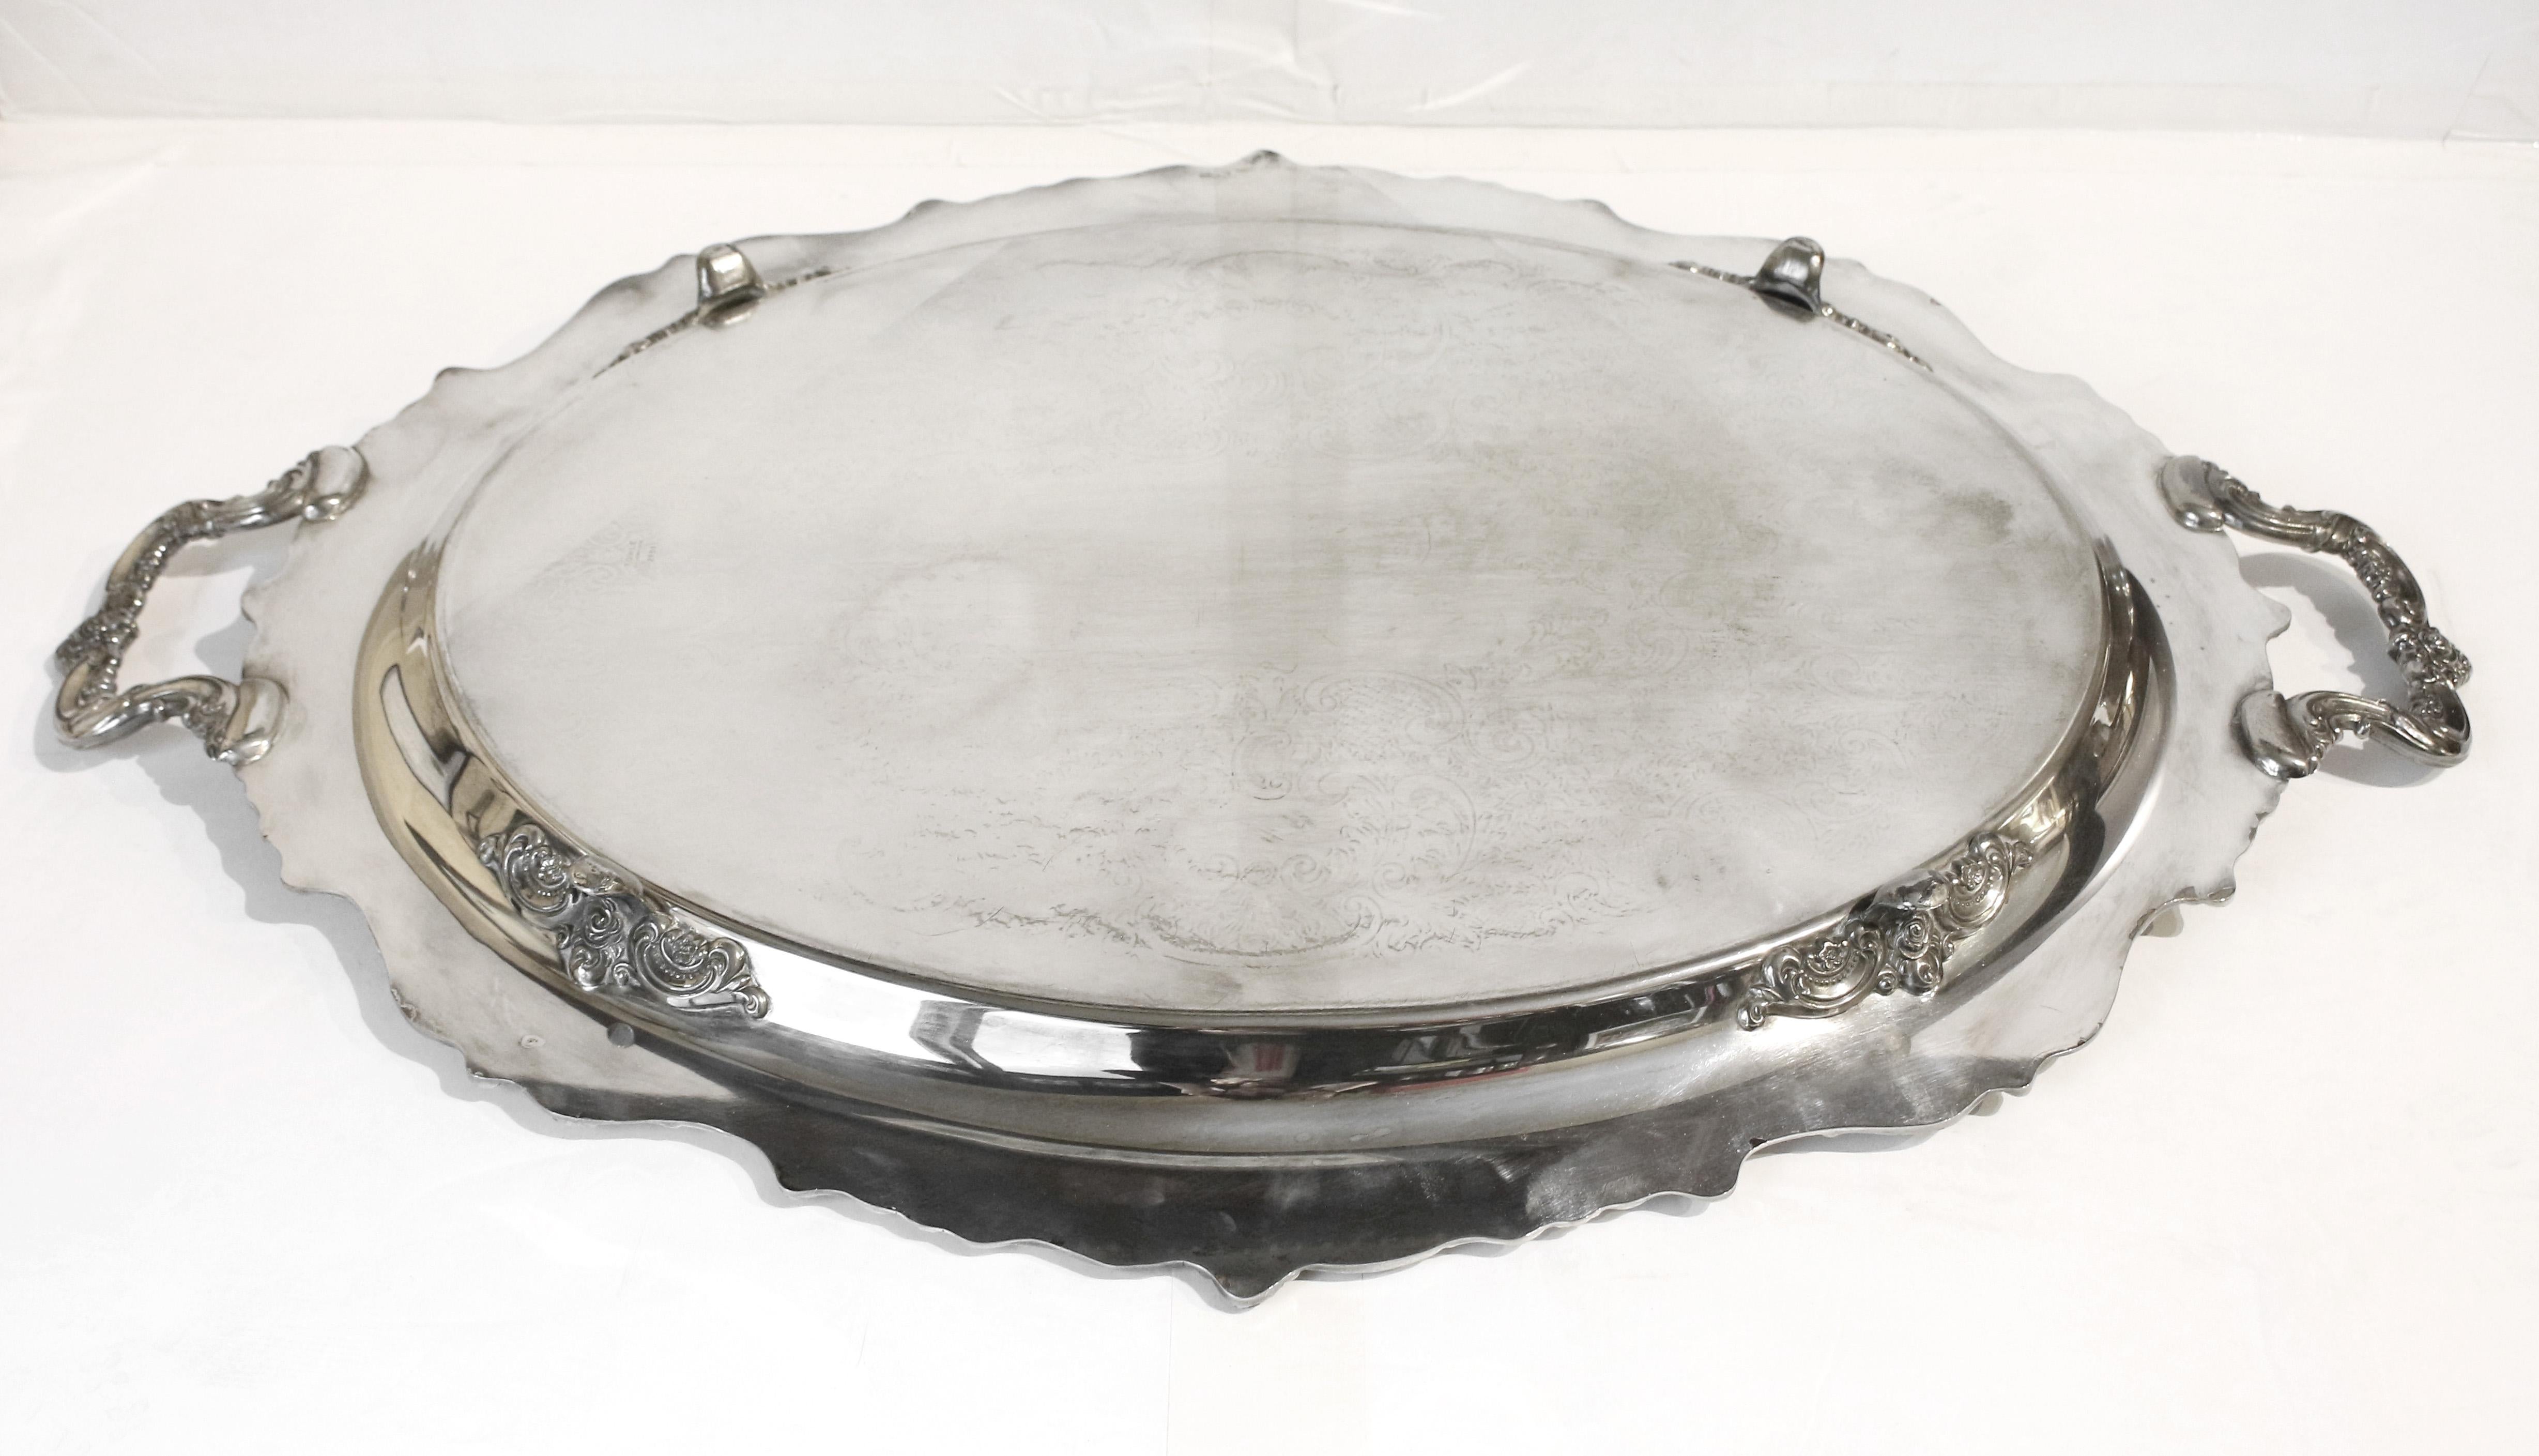 19th Century Late 19th to Early 20th Century Rococo-Style Silver Plate Tea Tray by Towle For Sale